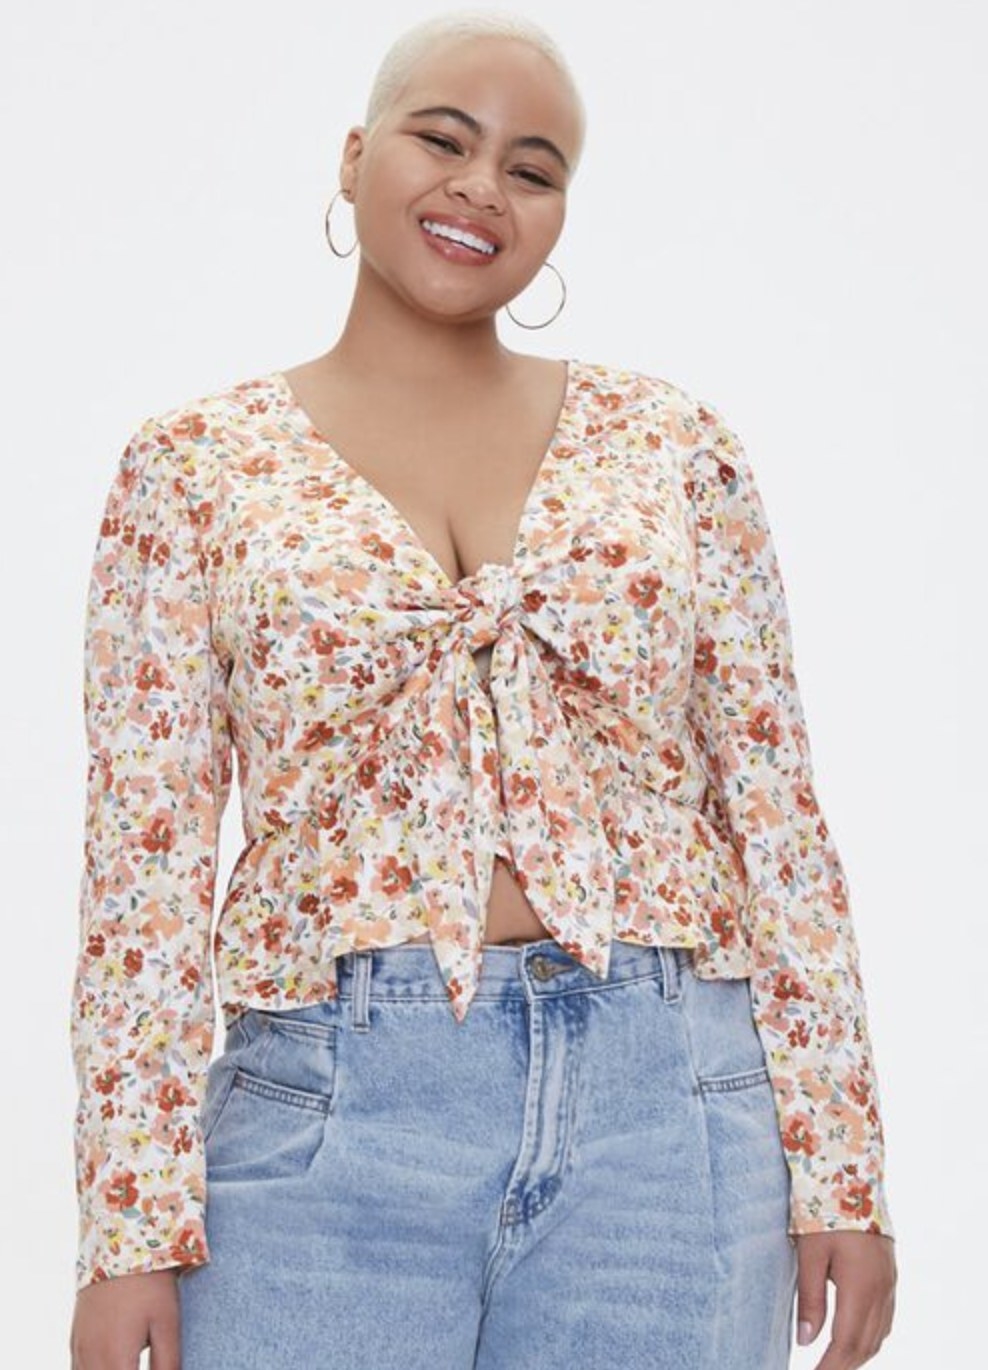 31 Cheap Things From Forever 21 You'll Want To Buy ASAP